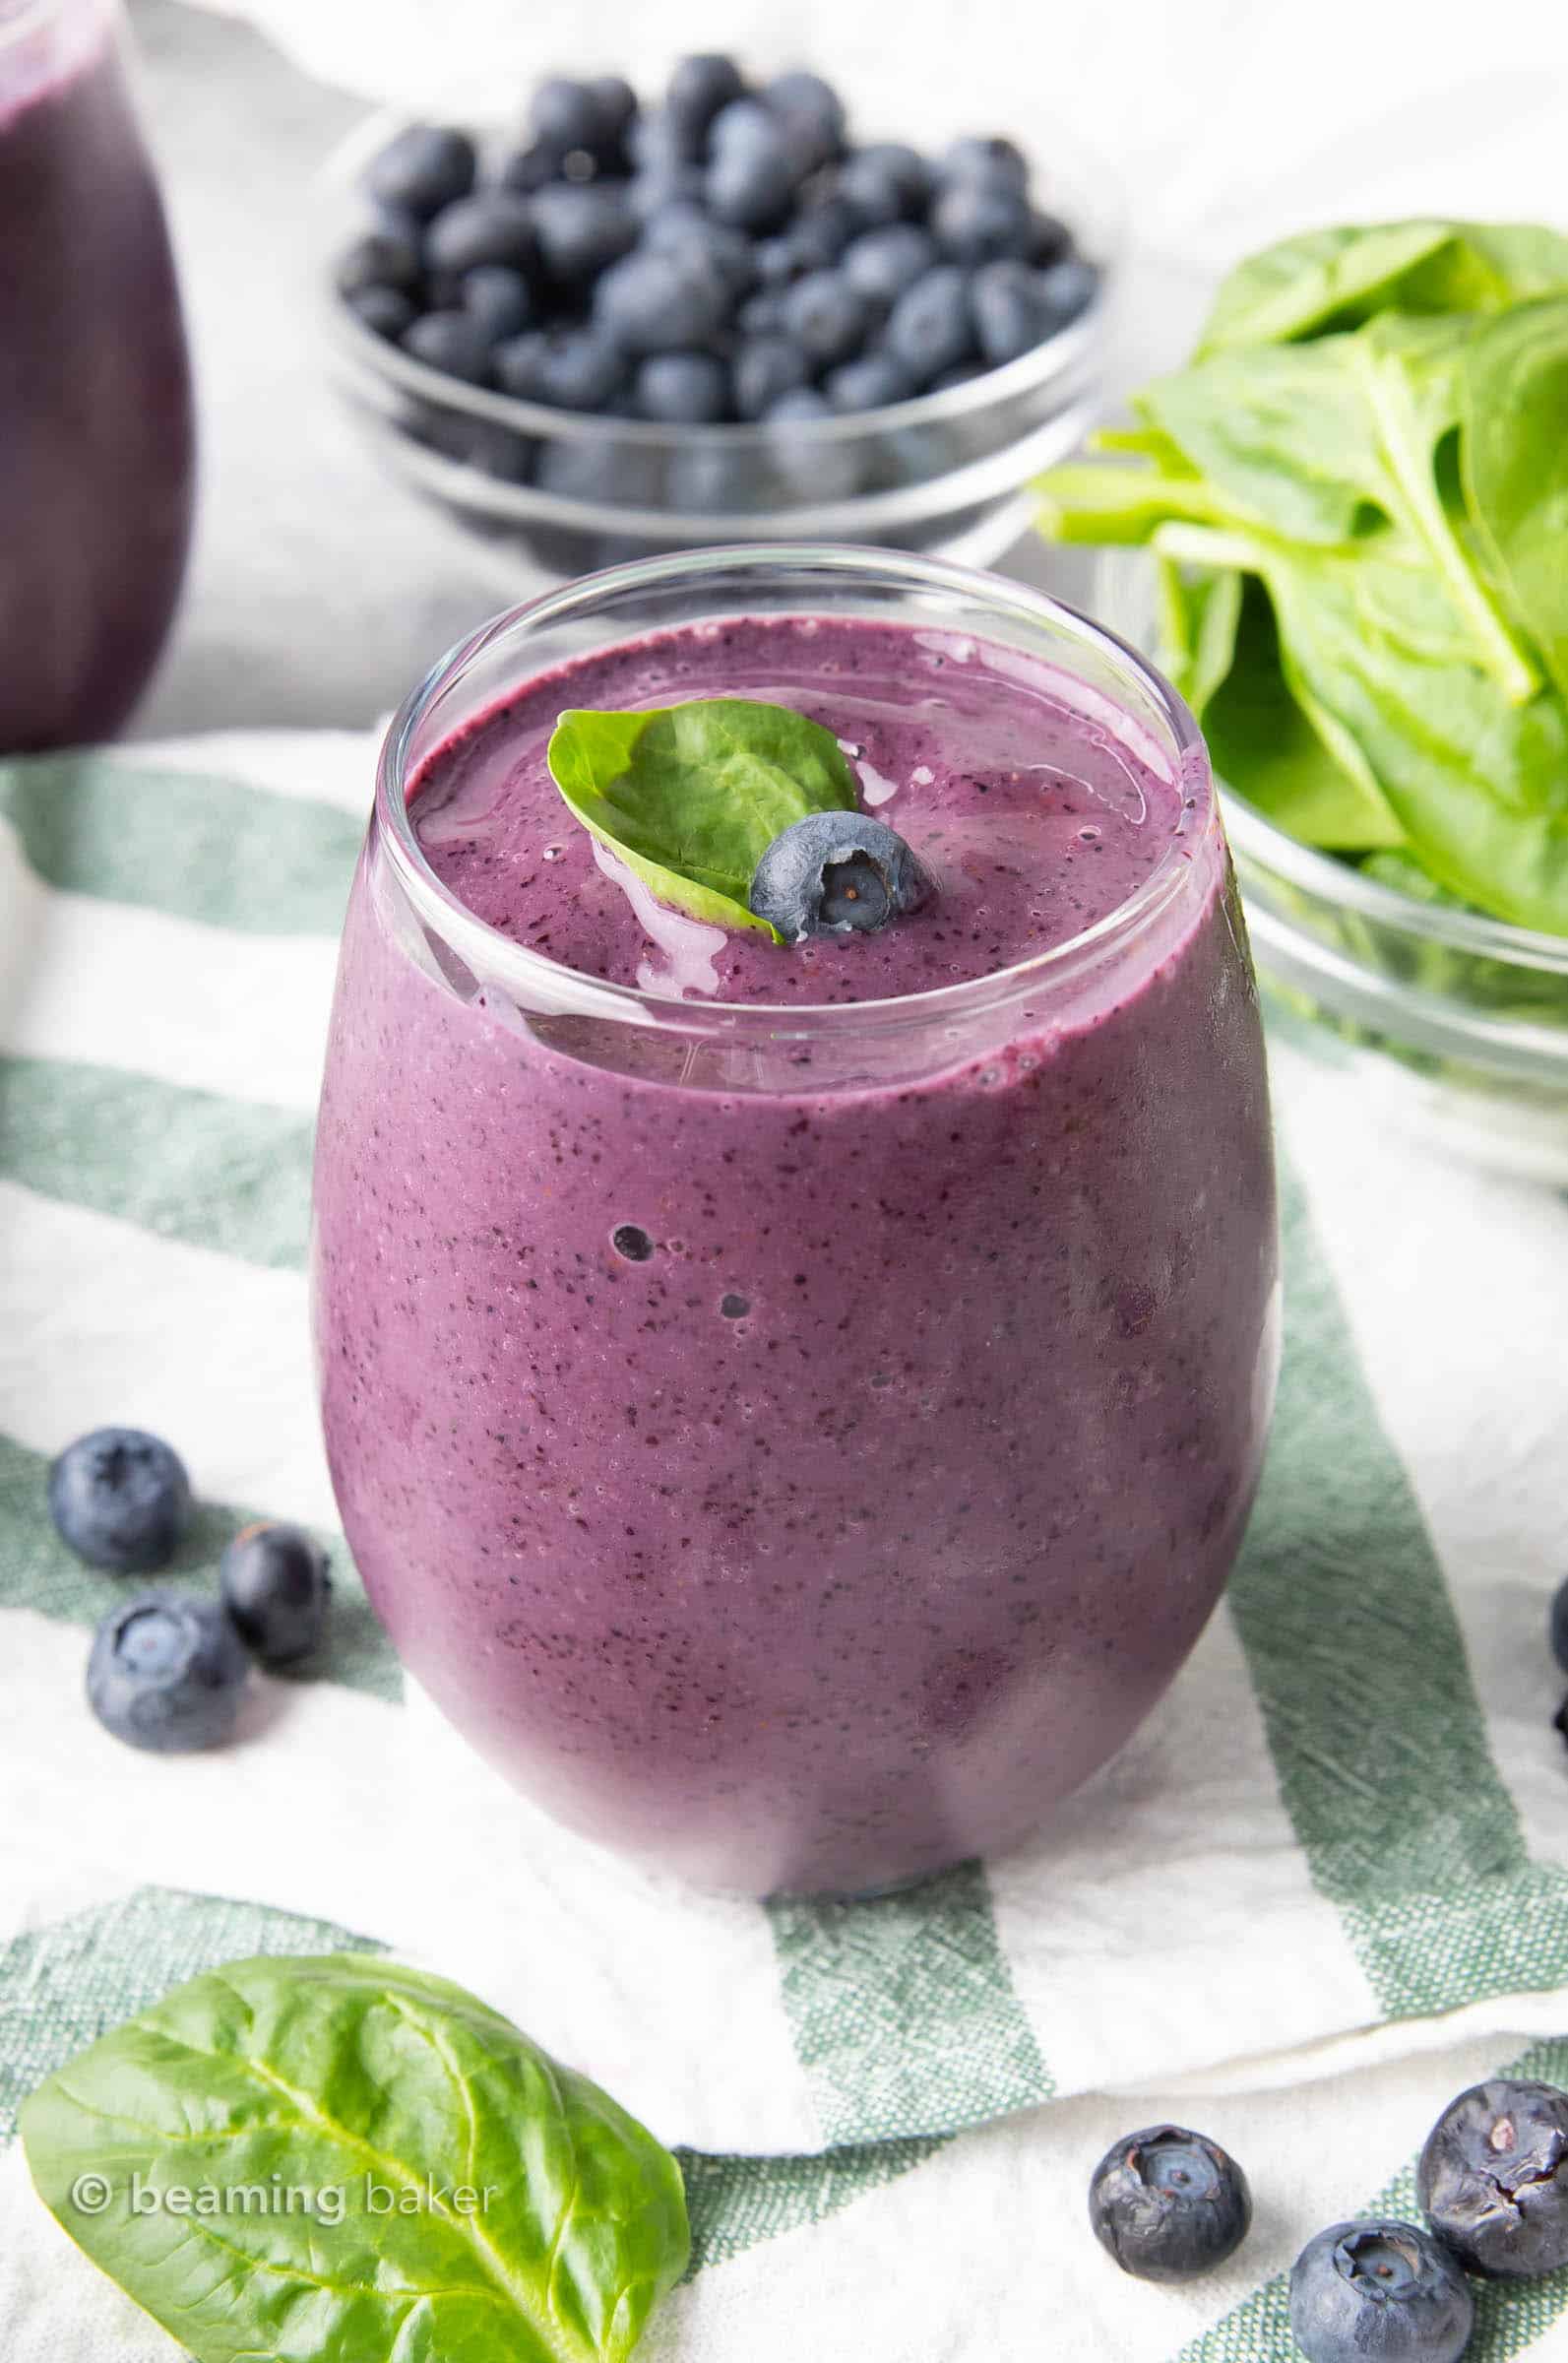 Blueberry Spinach Smoothie: an easy 4 ingredient recipe for a refreshing, healthy blueberry spinach smoothie packed with antioxidants. Ready in minutes. #Blueberry #Spinach #Smoothie #Healthy | Recipe at BeamingBaker.com